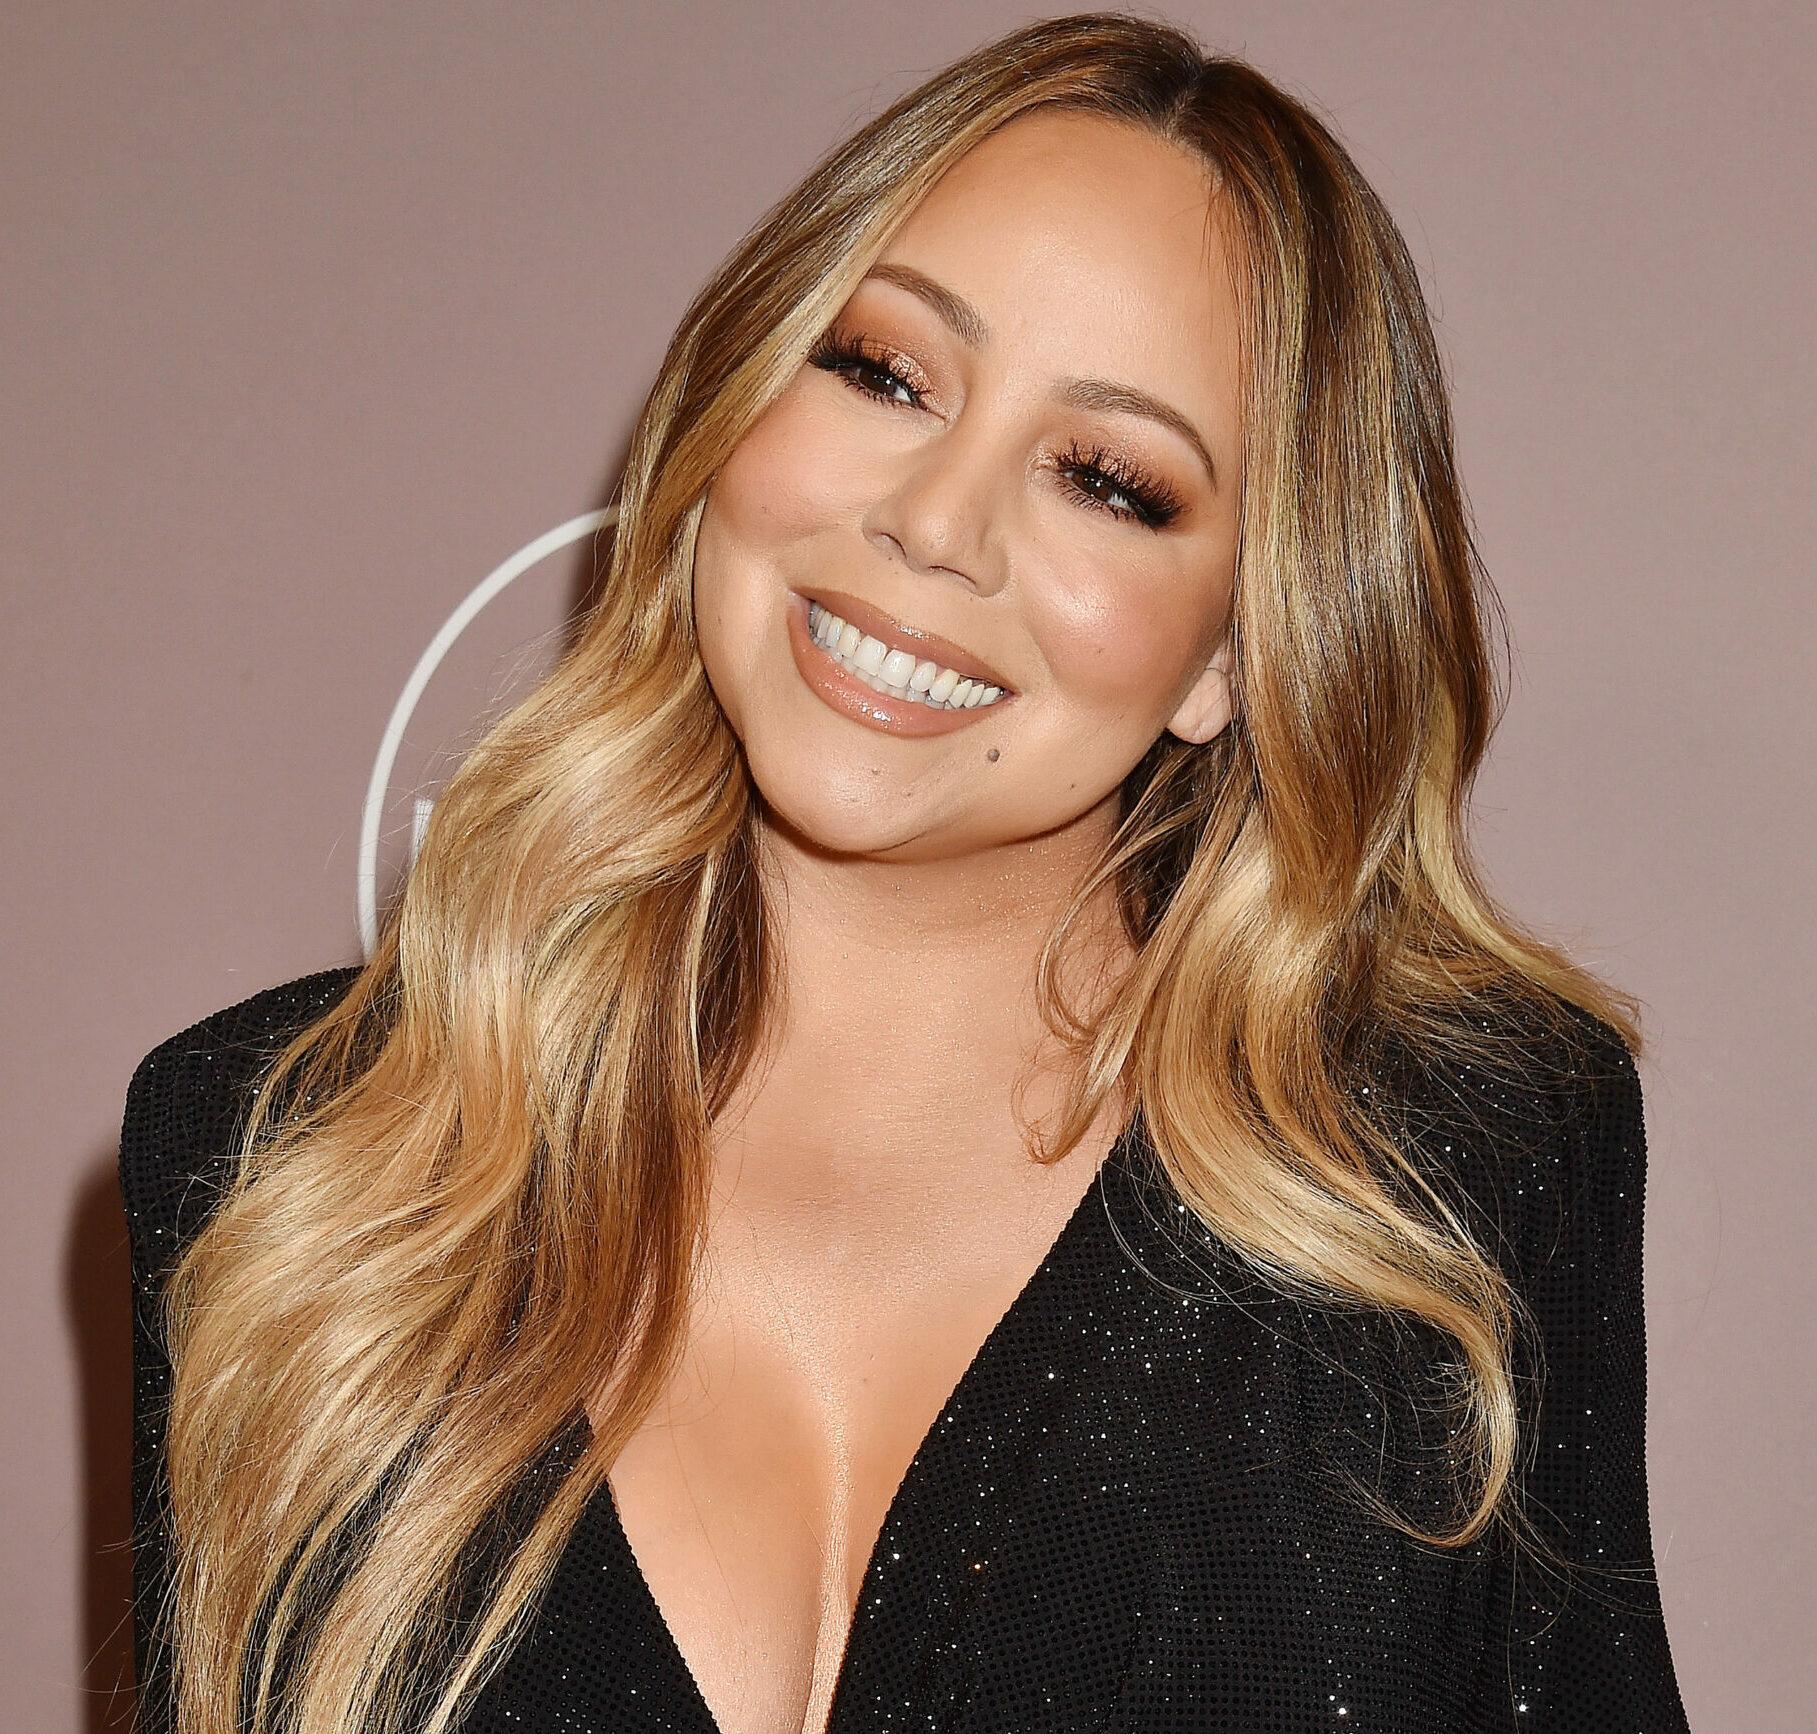 BEVERLY HILLS, CA - OCTOBER 11: Variety's 2019 Power of Women: Los Angeles presented by Lifetime at the Beverly Wilshire Four Seasons Hotel on October 11, 2019 in Beverly Hills, California. 11 Oct 2019 Pictured: Mariah Carey.